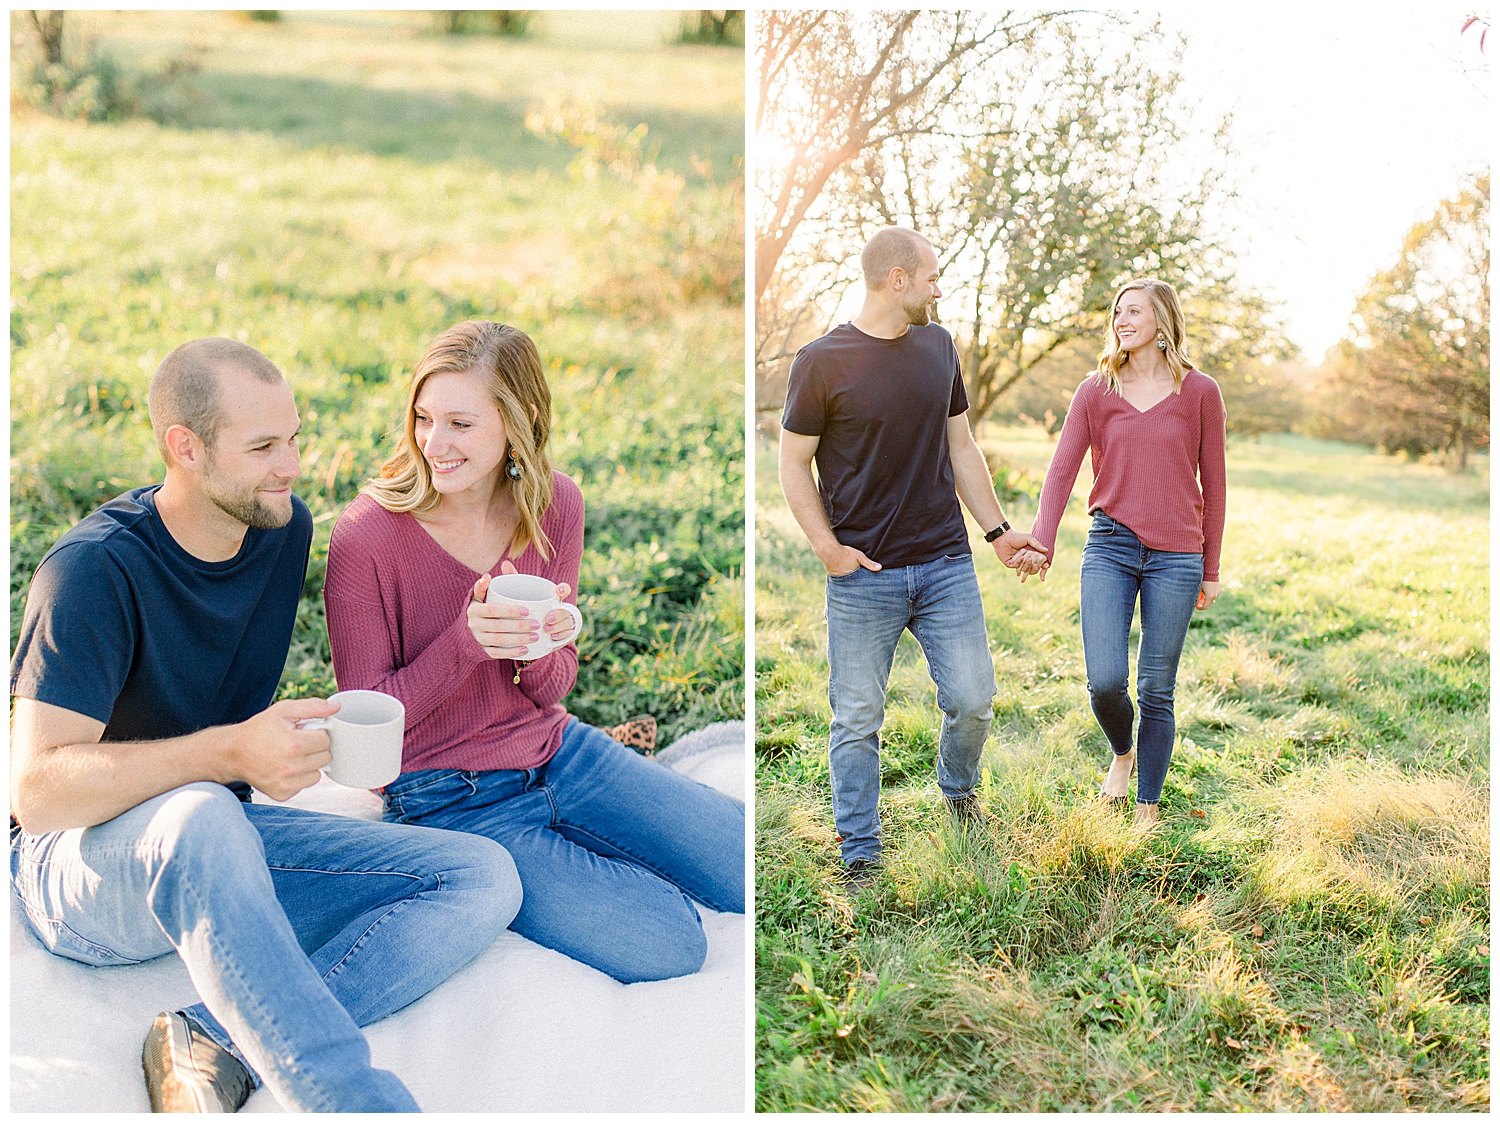 Wooster_OARDC_Rose_Garden_Cottage_Ohio_Engagement_Portraits_Kate_Mannella_Photography